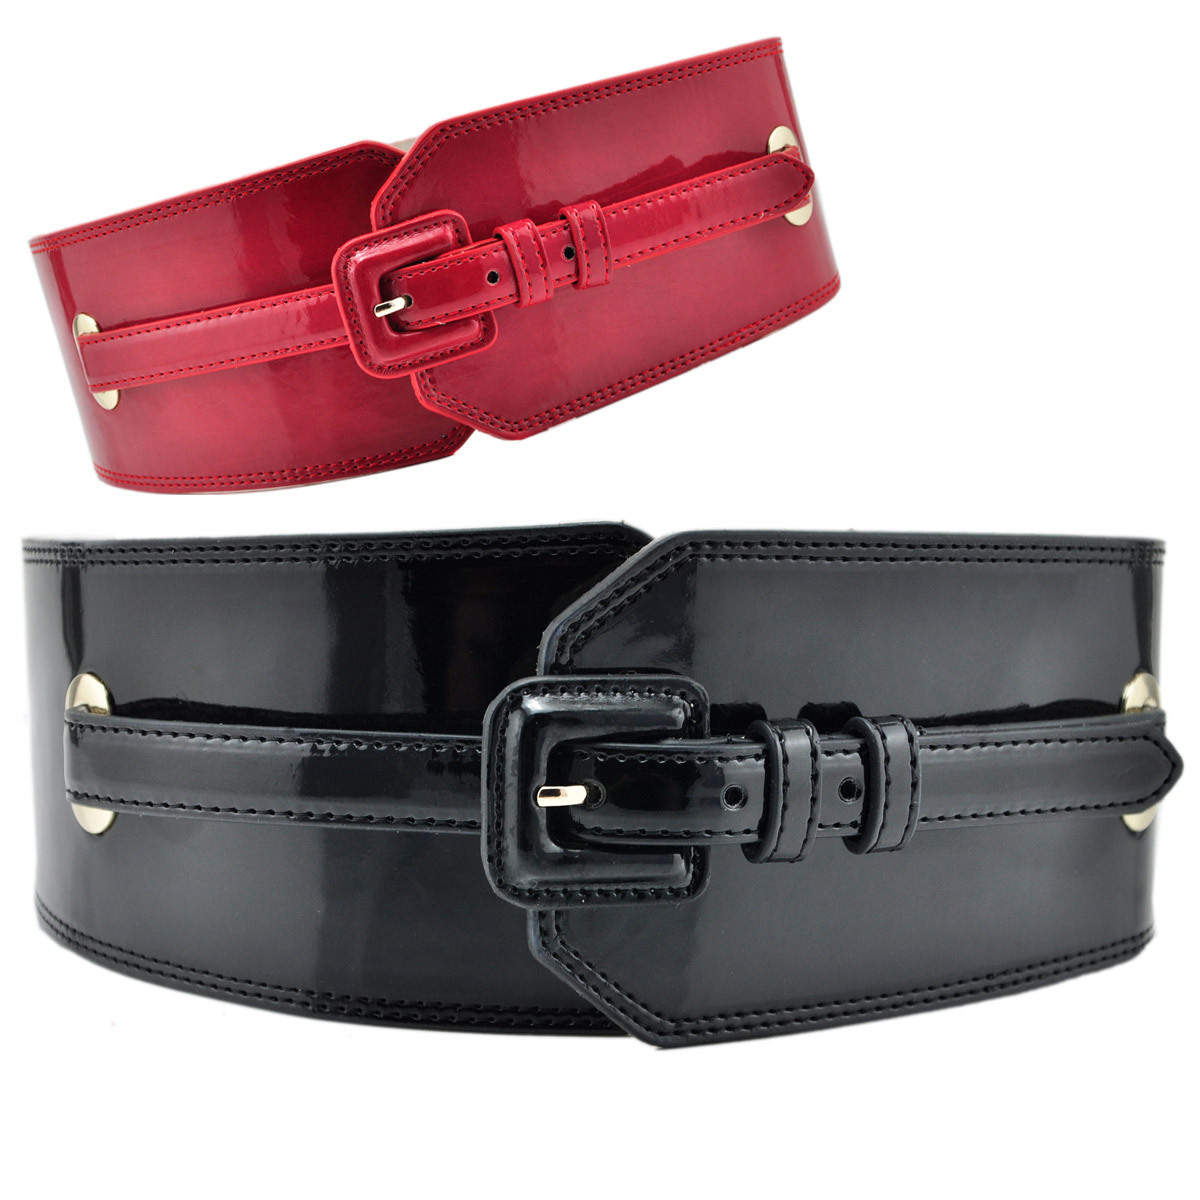 Genuine leather japanned leather fashion women's wide belt personality wide belt black red